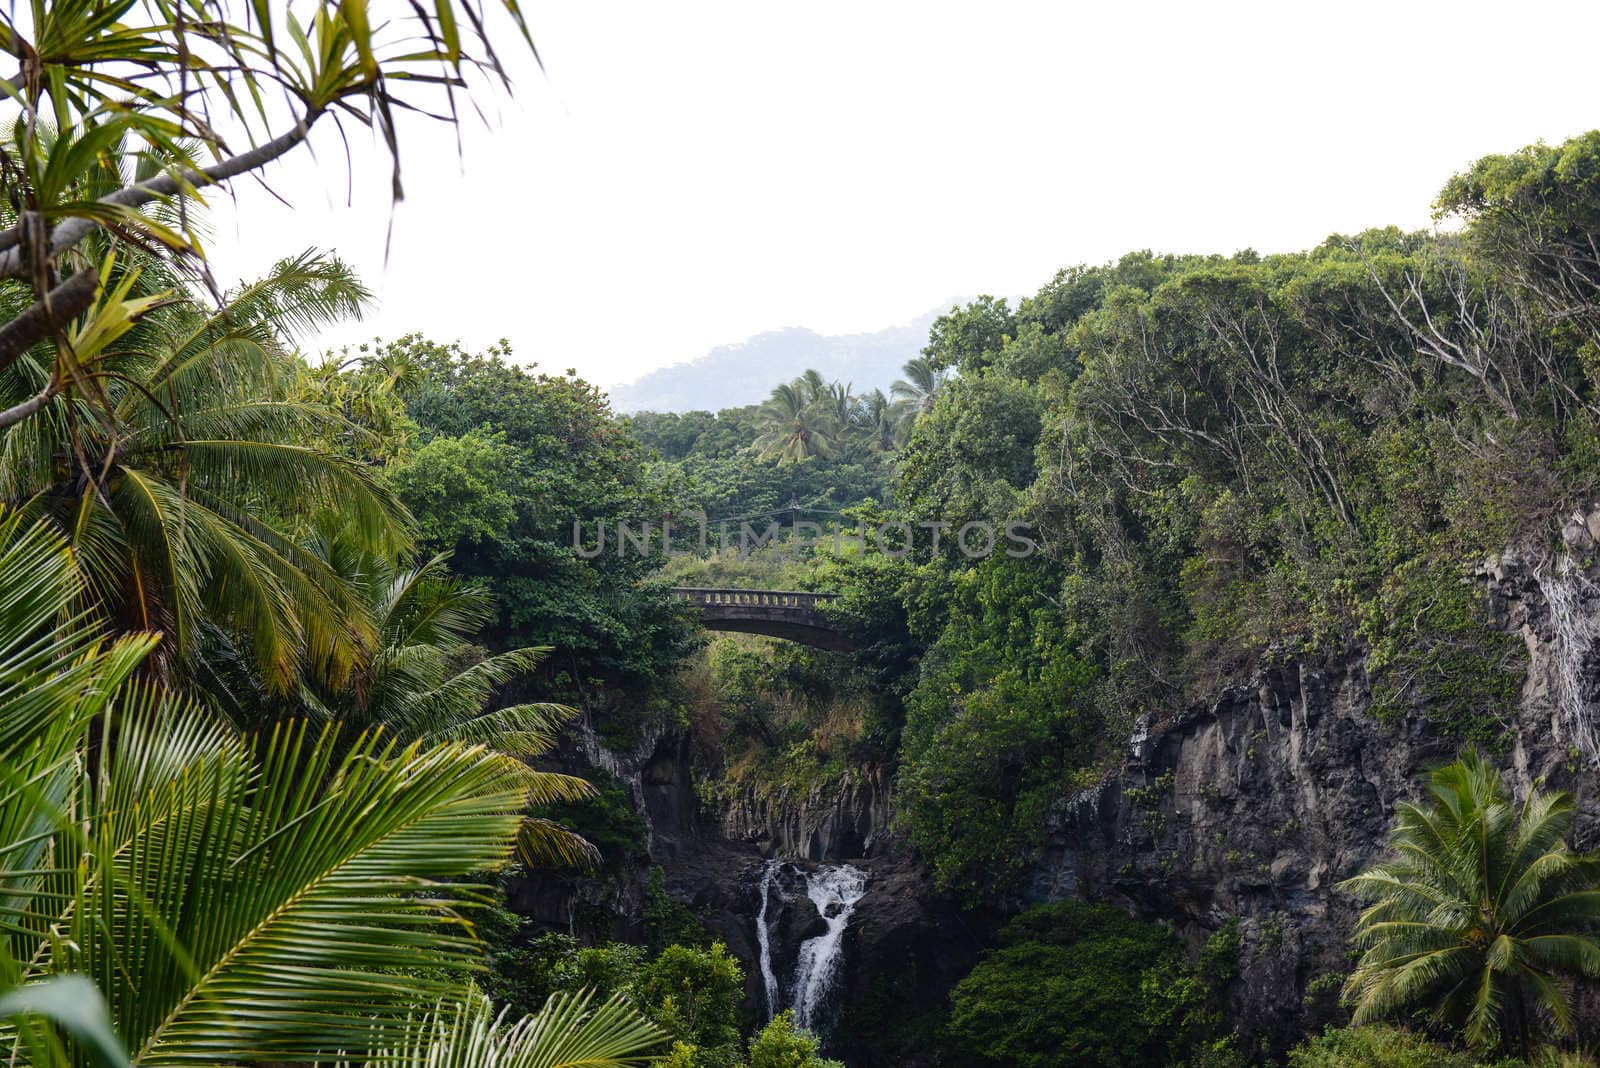 Bridge in Maui on the Road to Hana by bbourdages